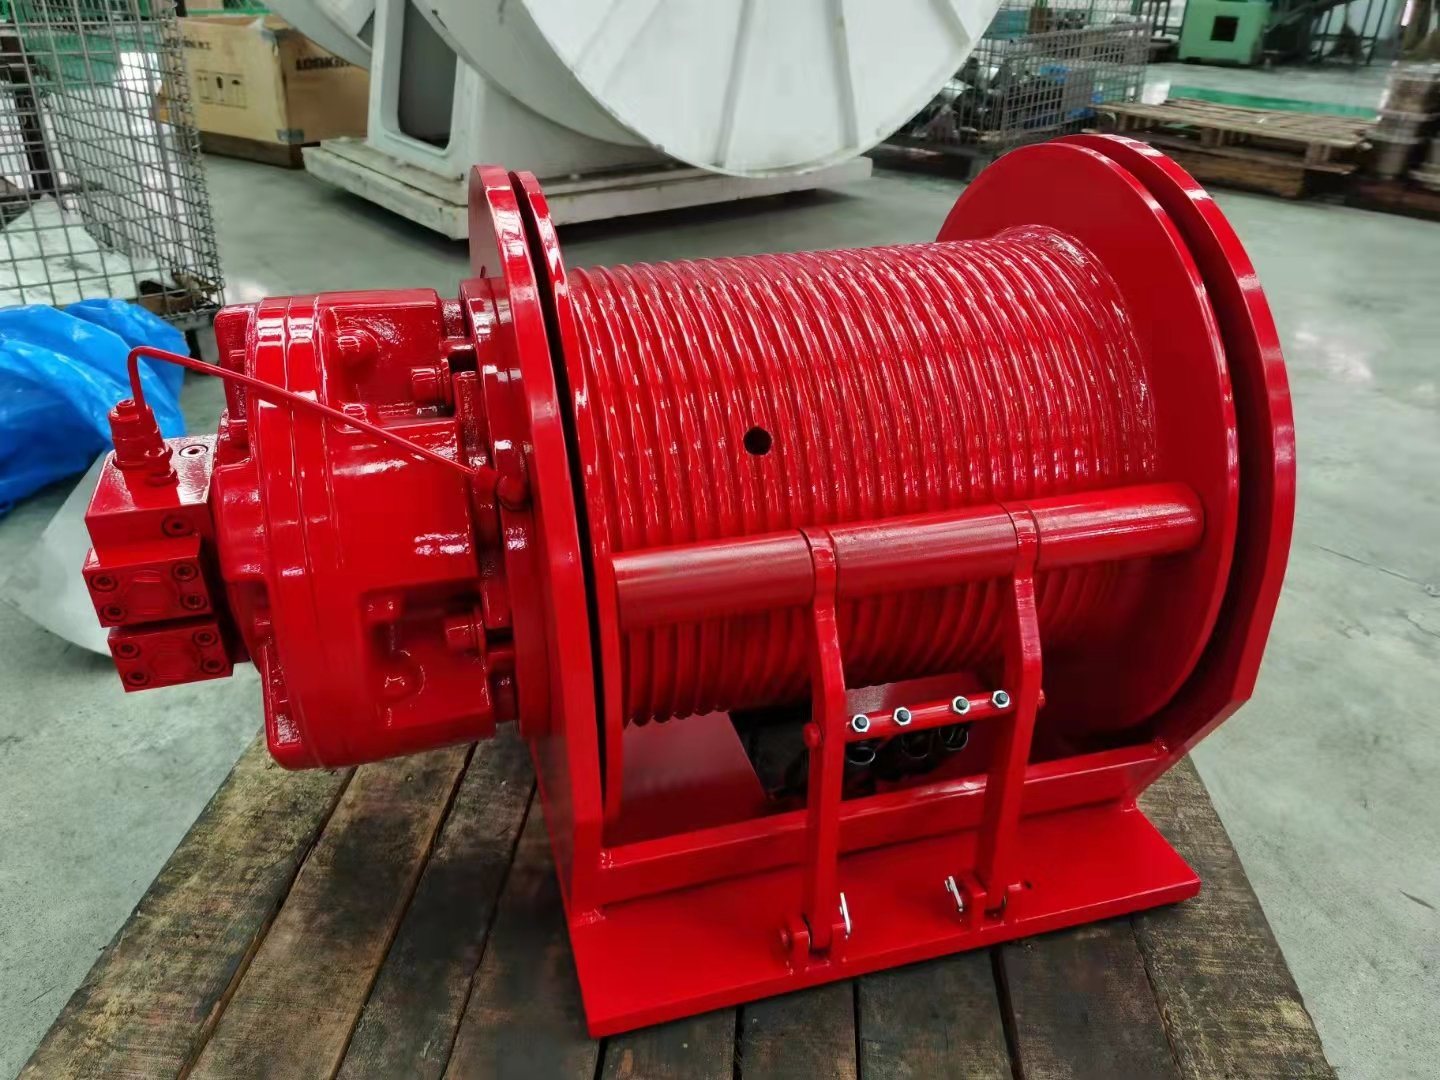 Sleep Way Marine Towing Winch for Vessel Dry Docking Located on The Upper Deck